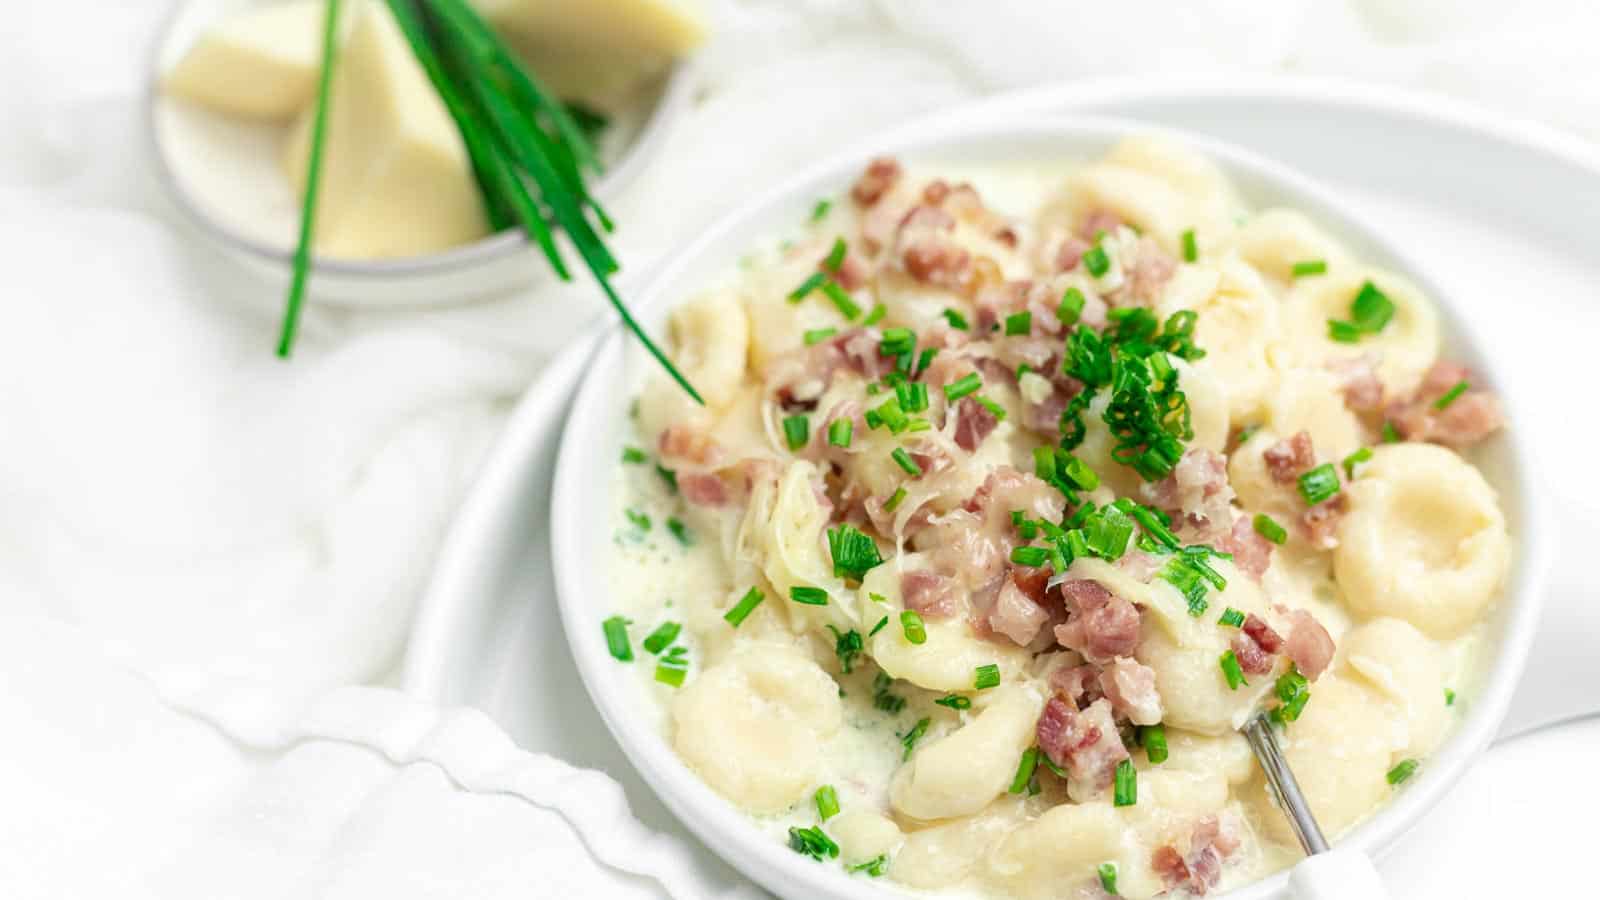 Gnocchi with Bacon and Cream Sauce served on a white plate.